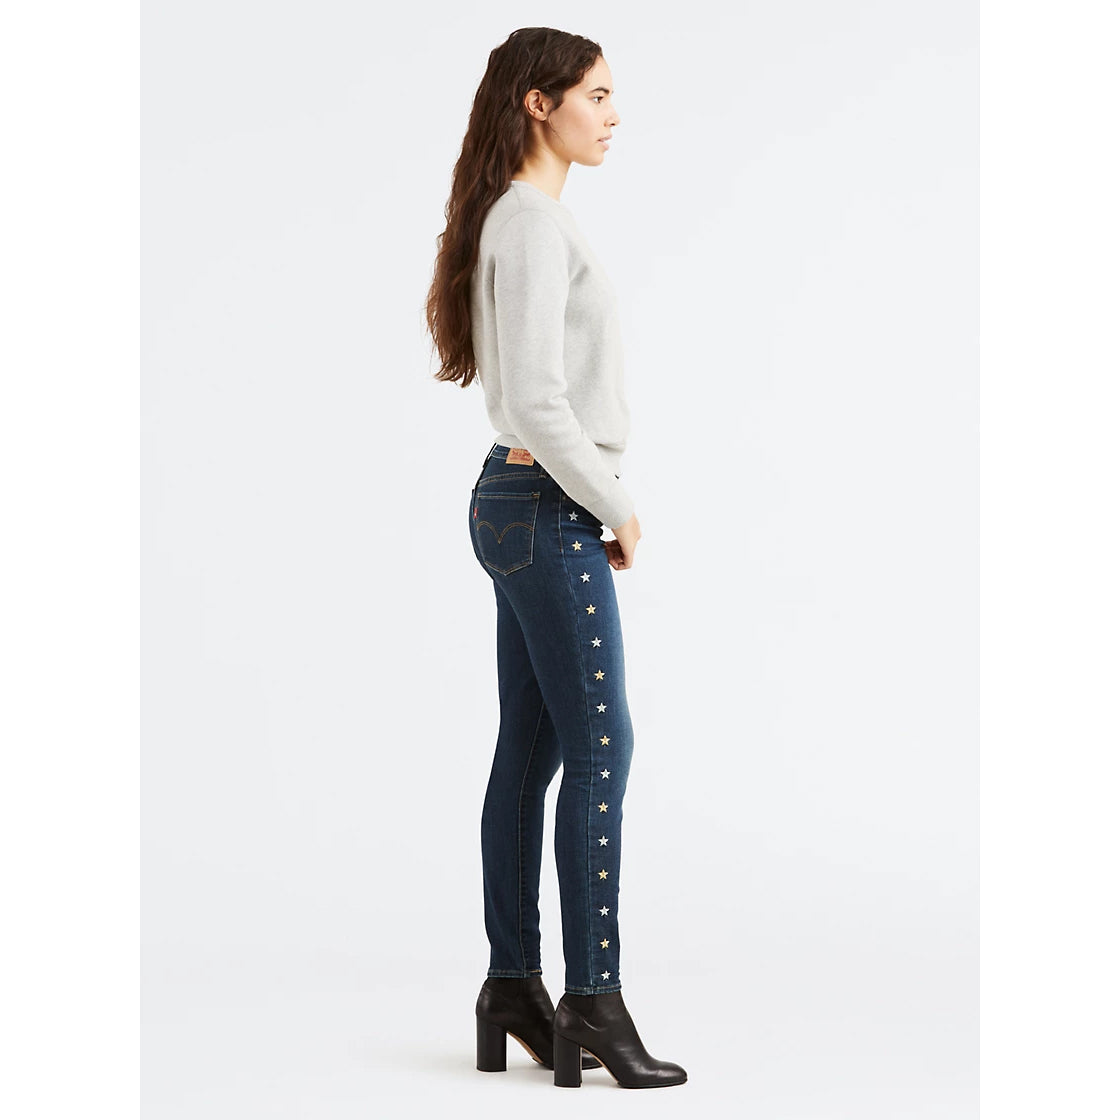 Levi's Women's 711 Mid Rise Embroidered Skinny Jeans (188810296)